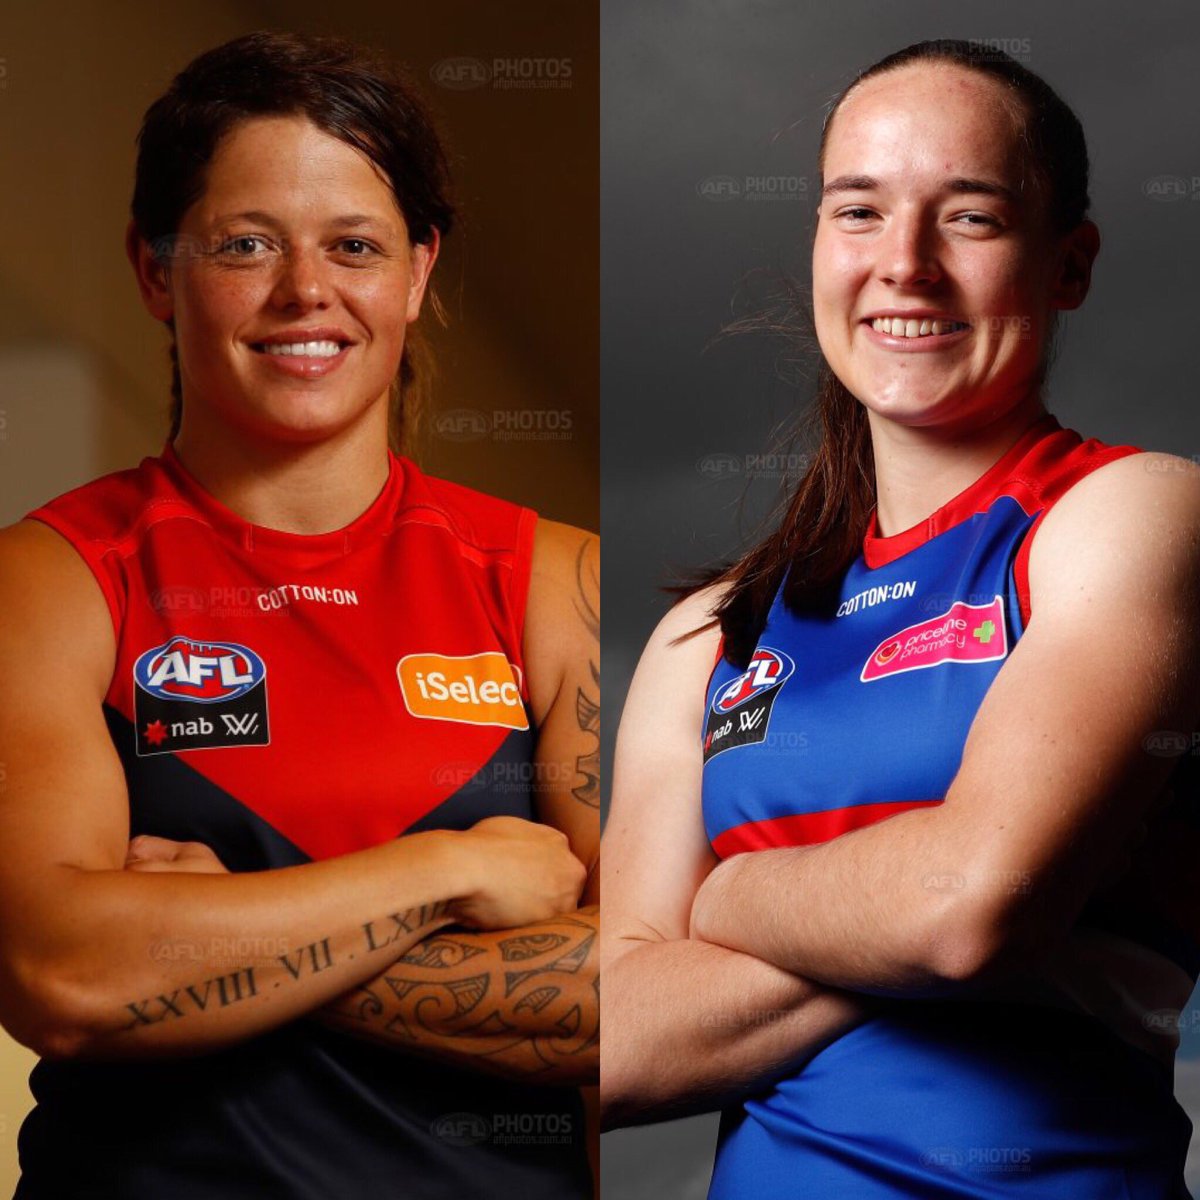 It wasn't ALL fire & brimstone on our latest Ep. We also talk footy, including post-match interviews with these two jets. 💪🏽🚀Tune in here: itunes.apple.com/au/podcast/thi… #ThisAFLLife #ChangeHerGame